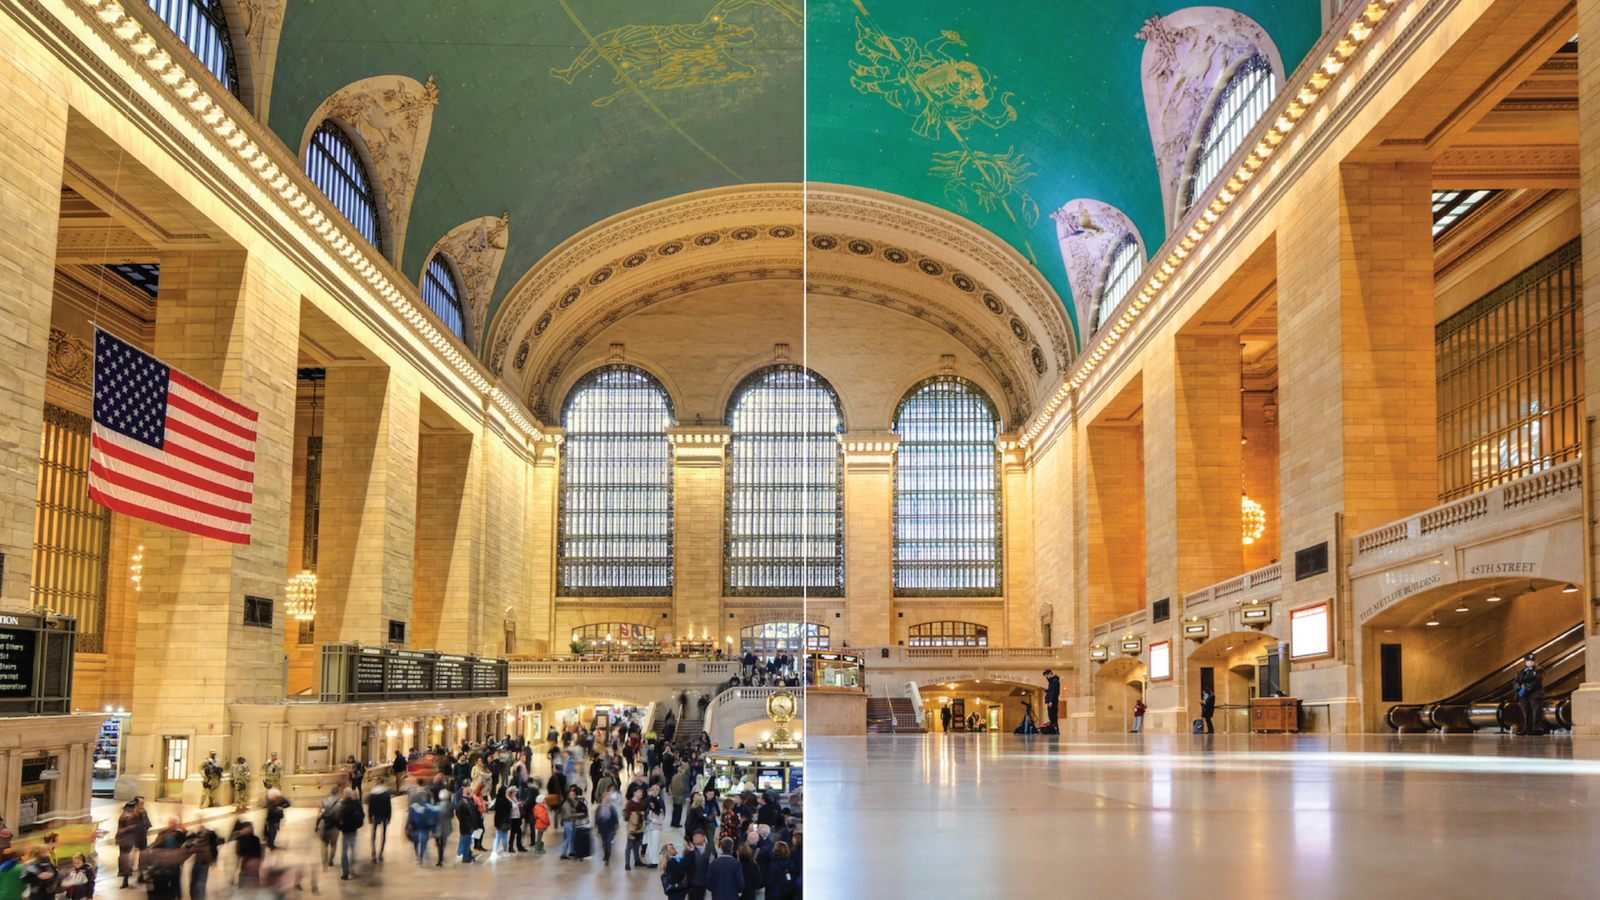 Grand Central Station before and during COVID-19